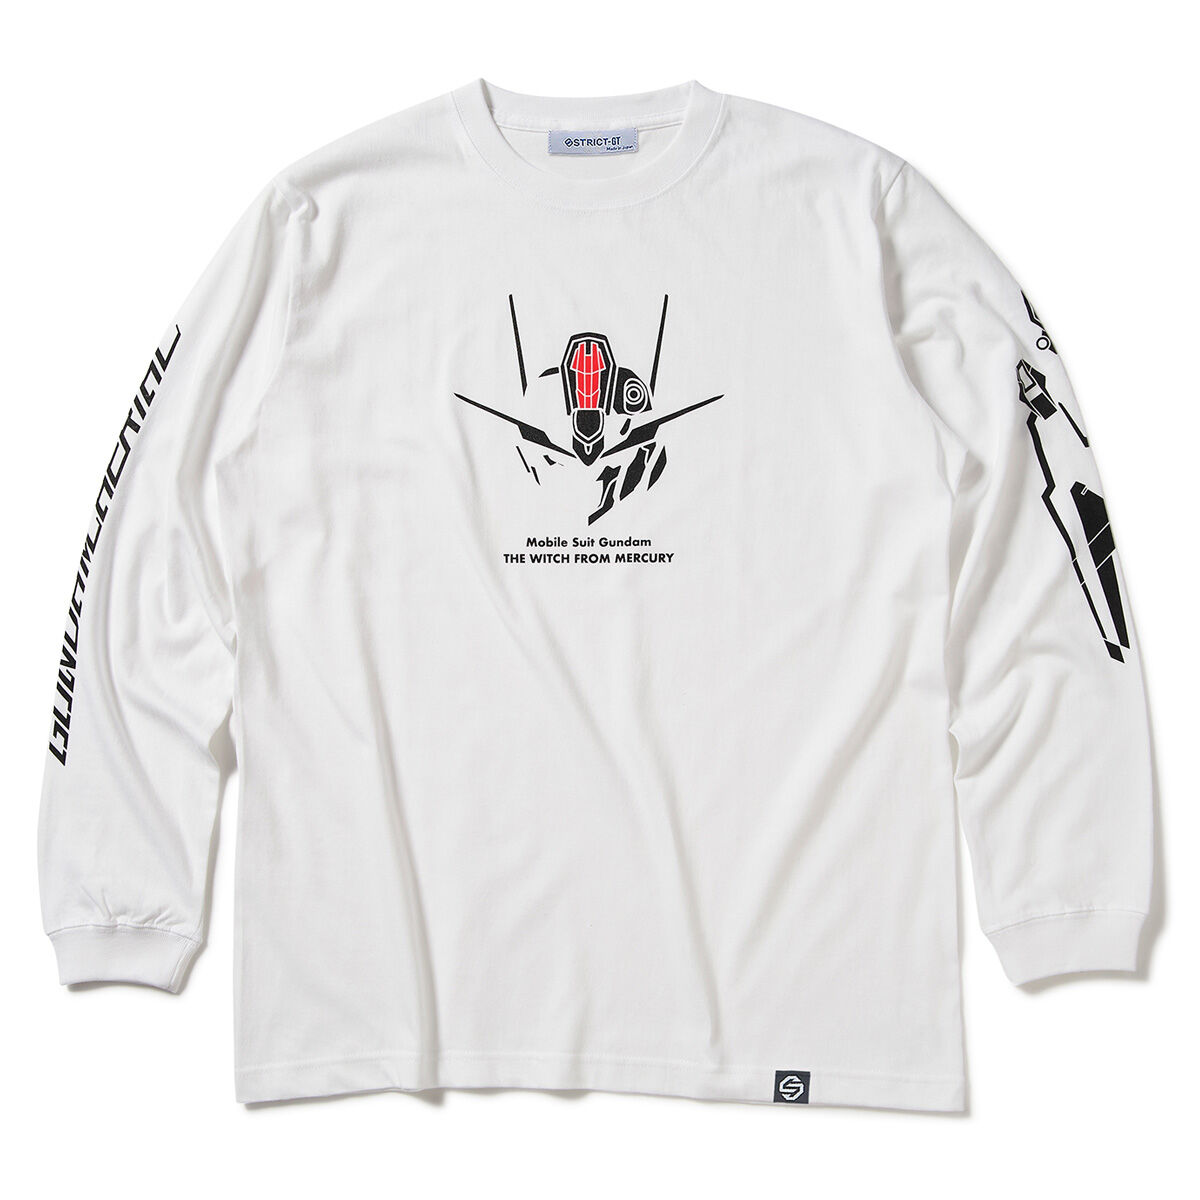 Gundam Aerial Silhouette Long-Sleeve T-shirt—Mobile Suit Gundam the Witch from Mercury/STRICT-G Collaboration